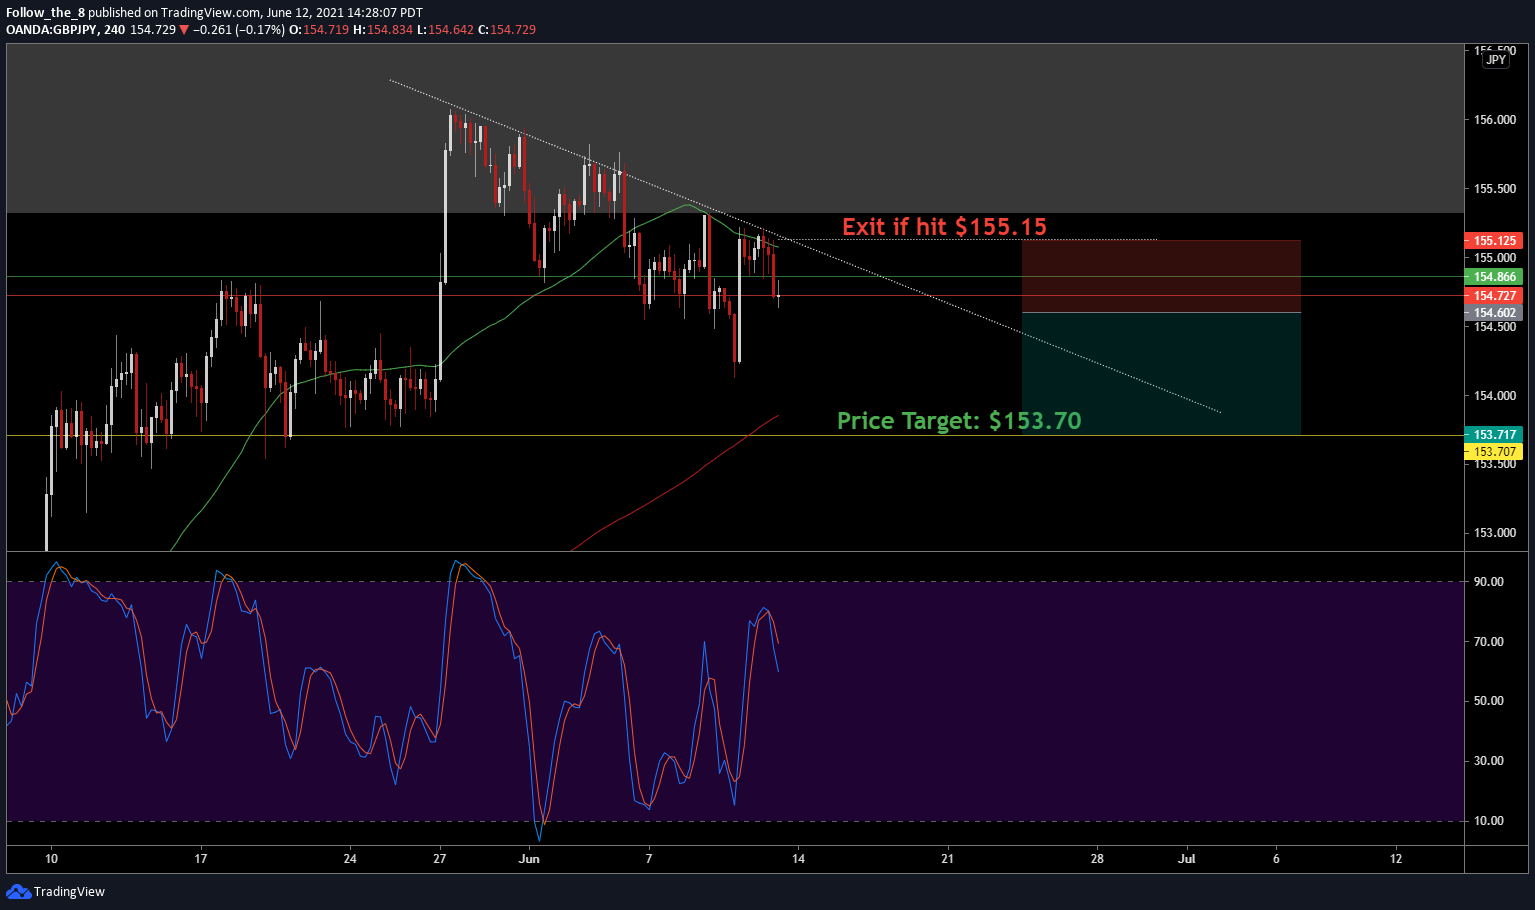 GBP/JPY H4 Price Action